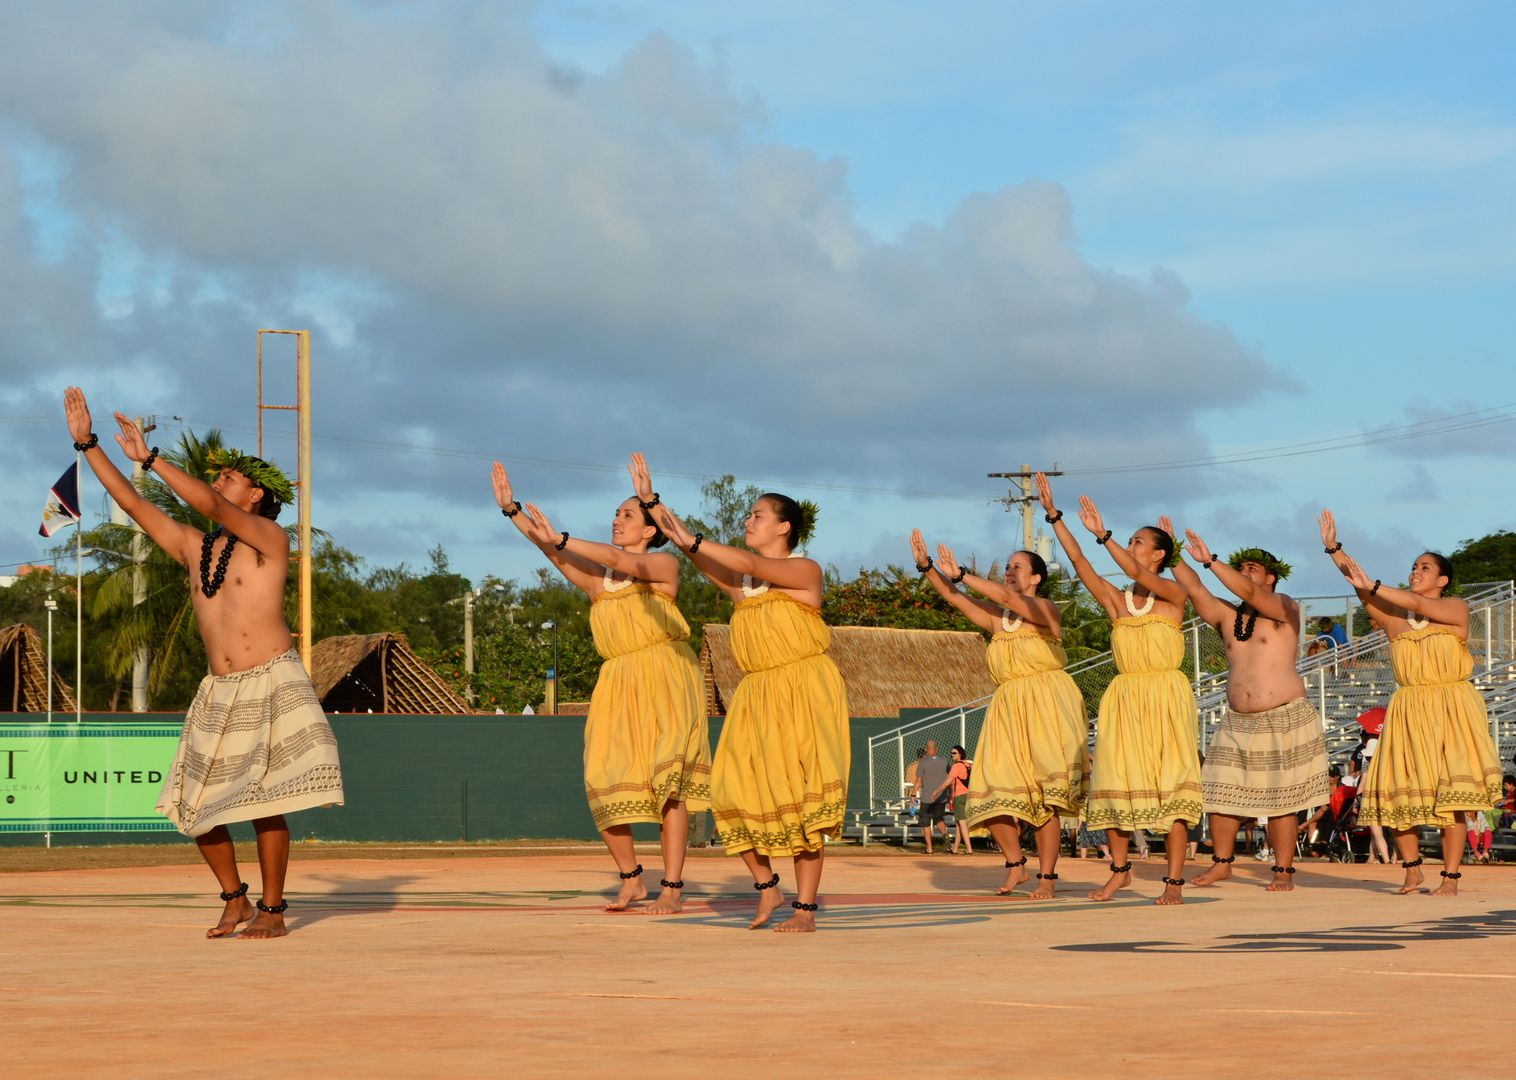 Festival of Pacific Arts and Culture Human Rights & Social Development